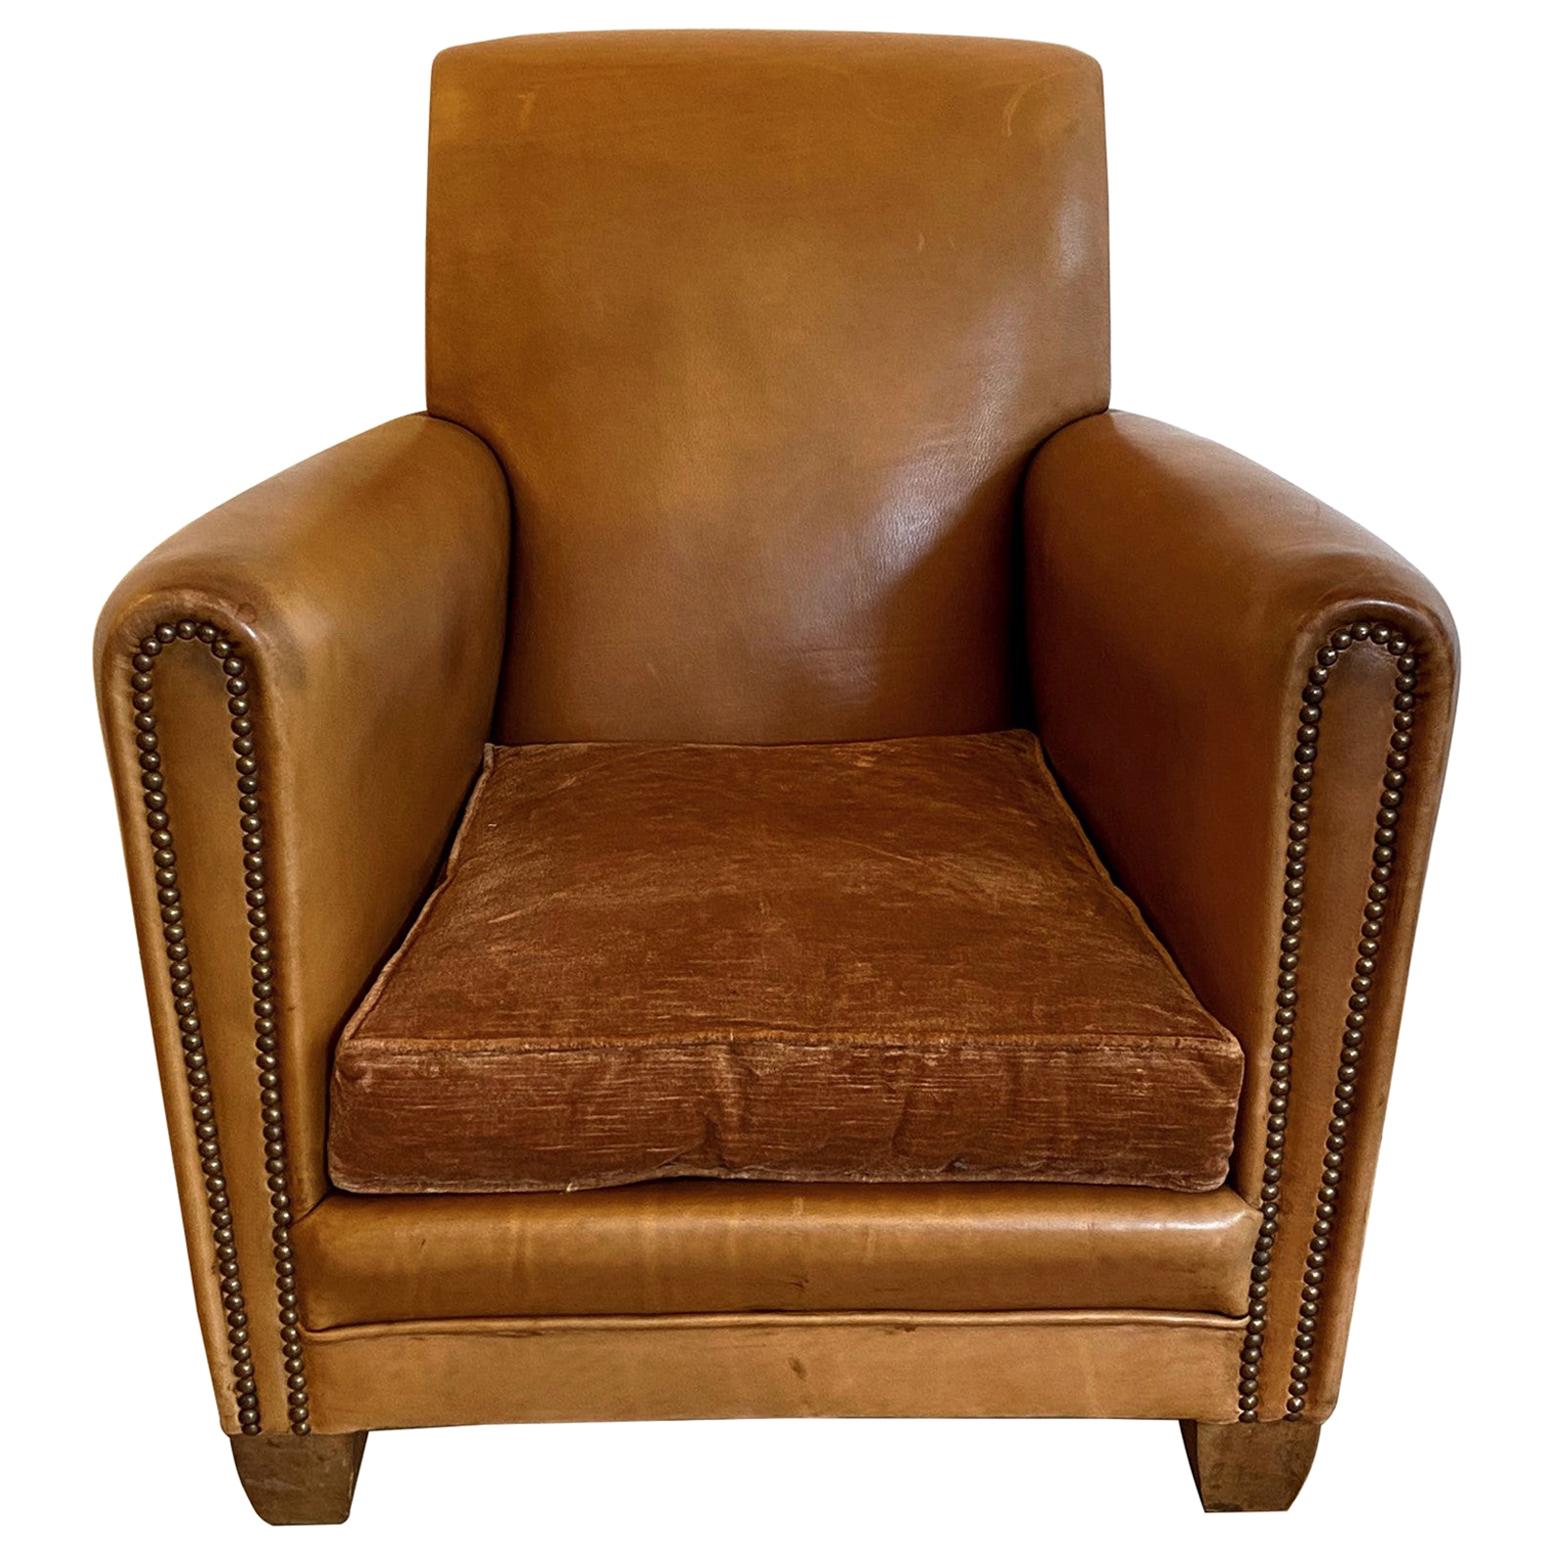 Vintage Single French Art Deco Brown Leather Club Chair with Mohair Covered Seat